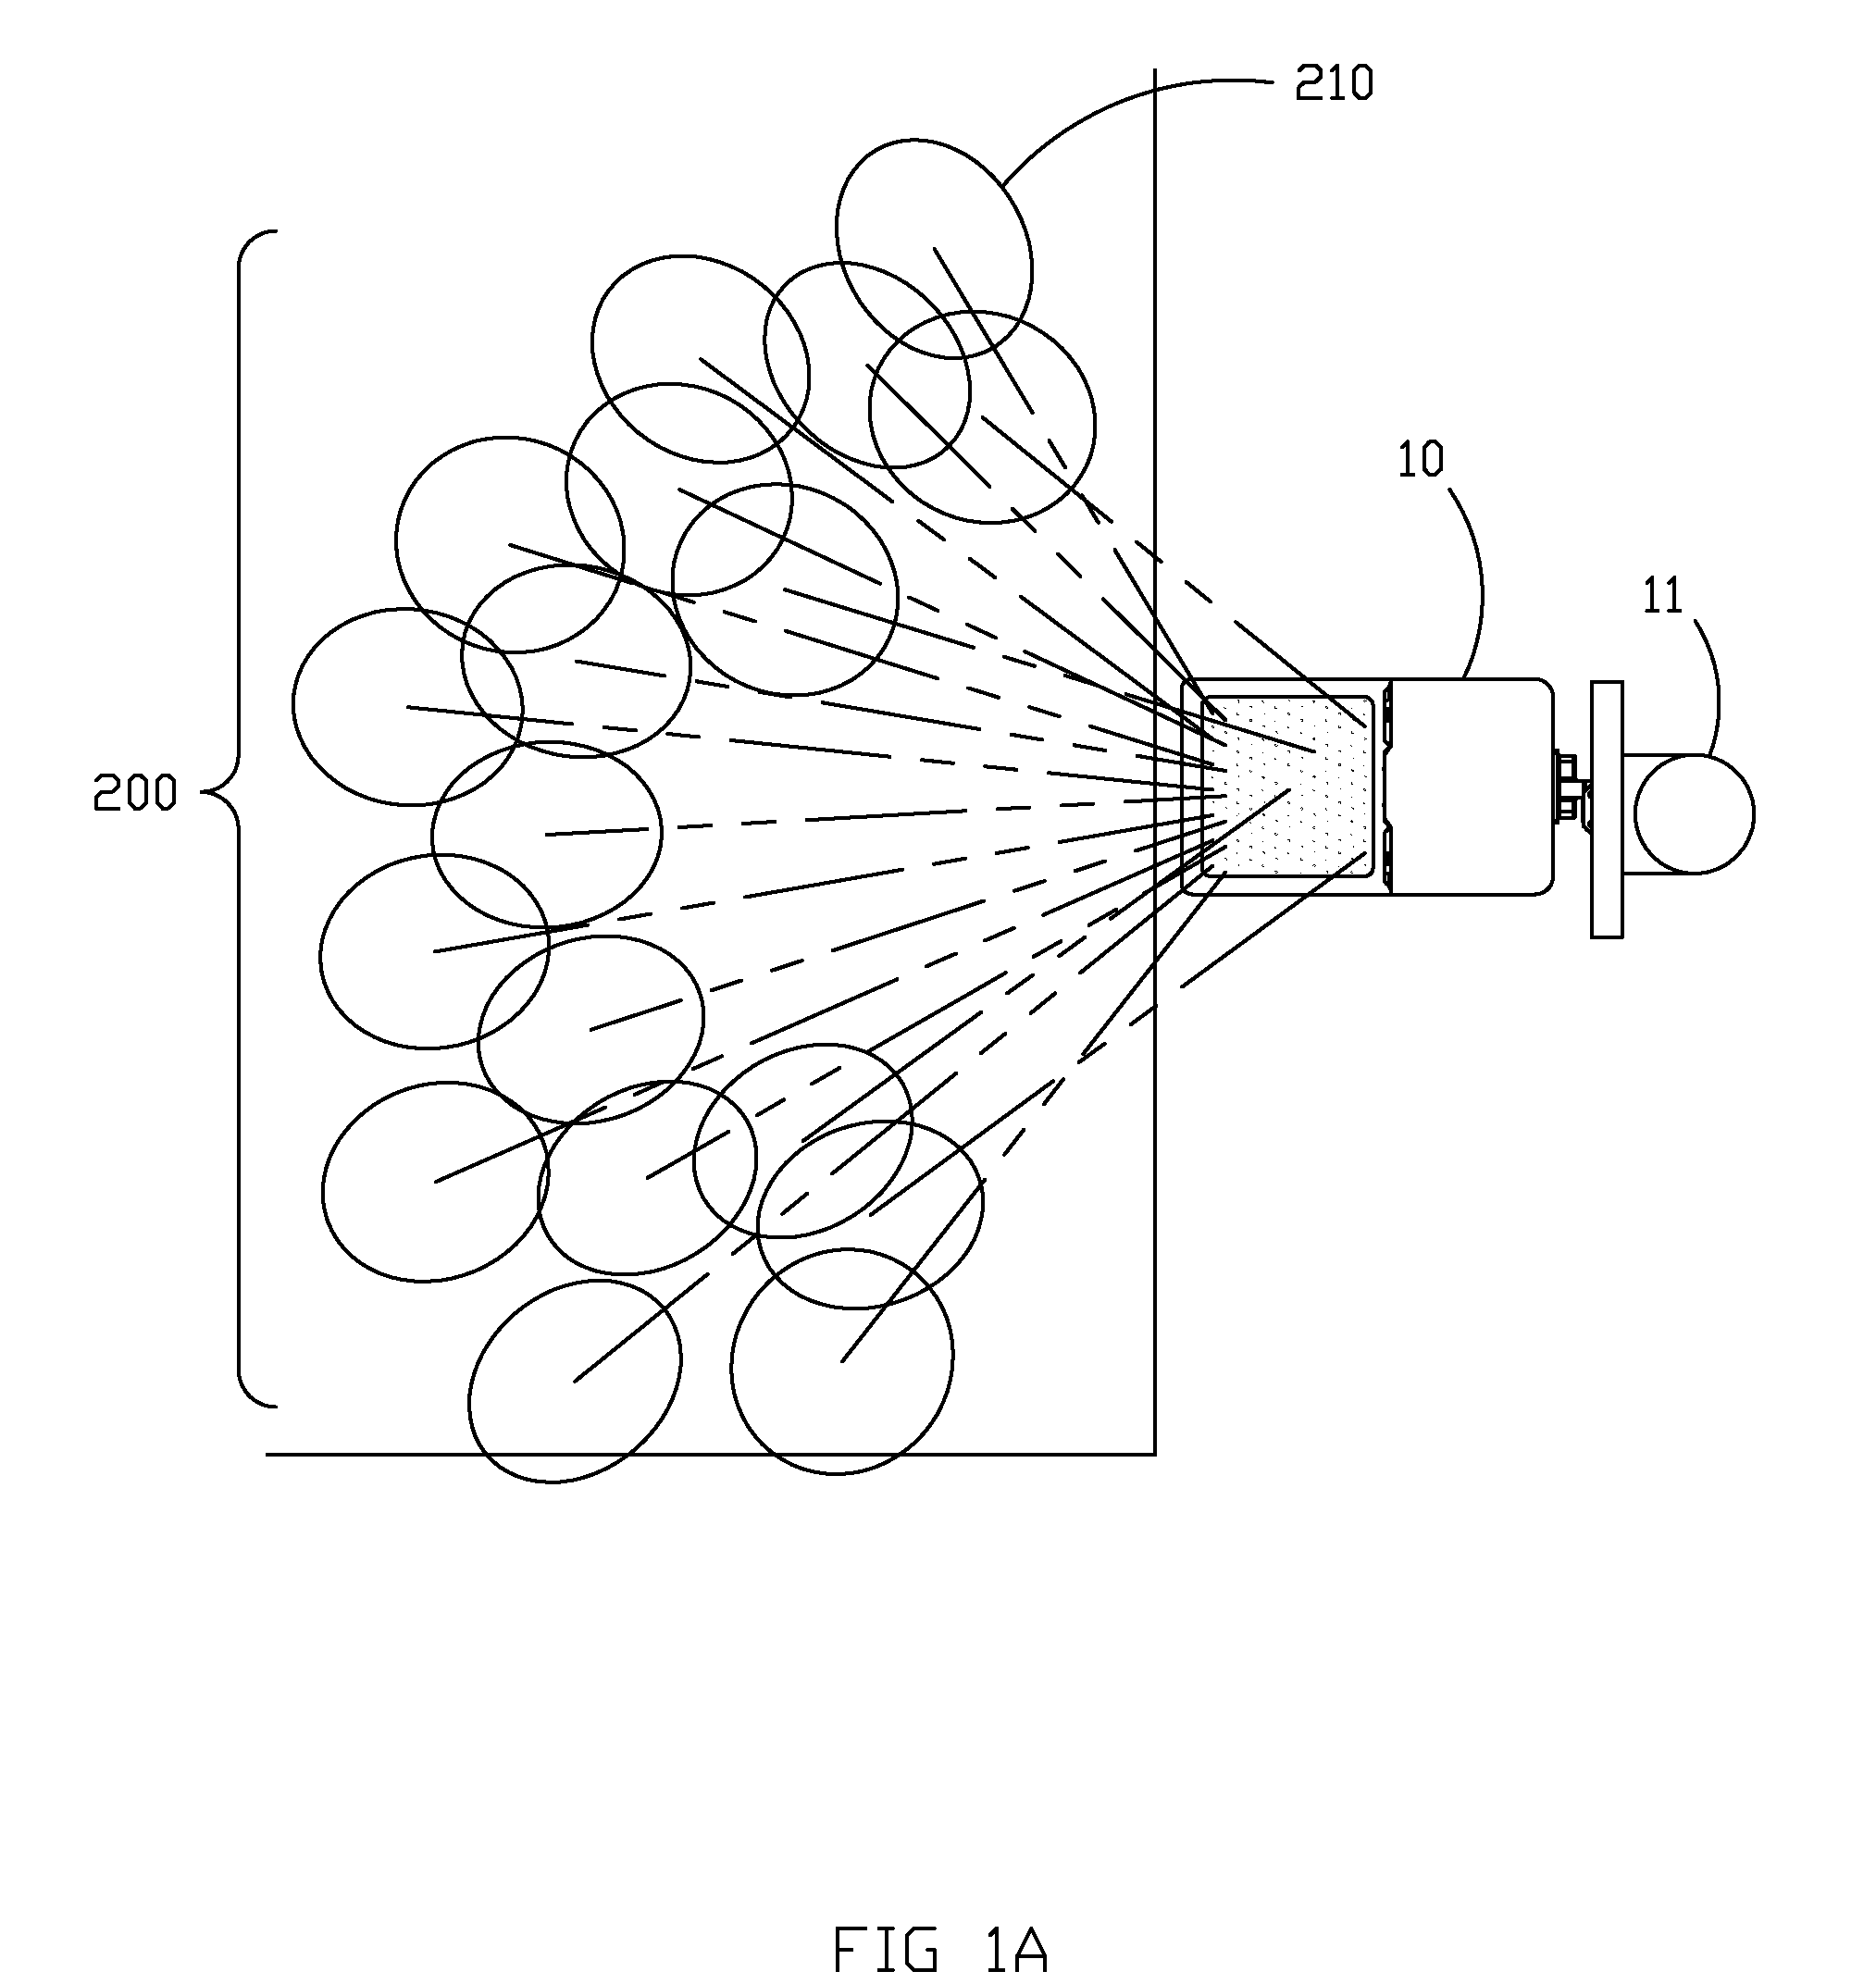 Apparatus, method, and system for highly controlled light distribution using multiple light sources